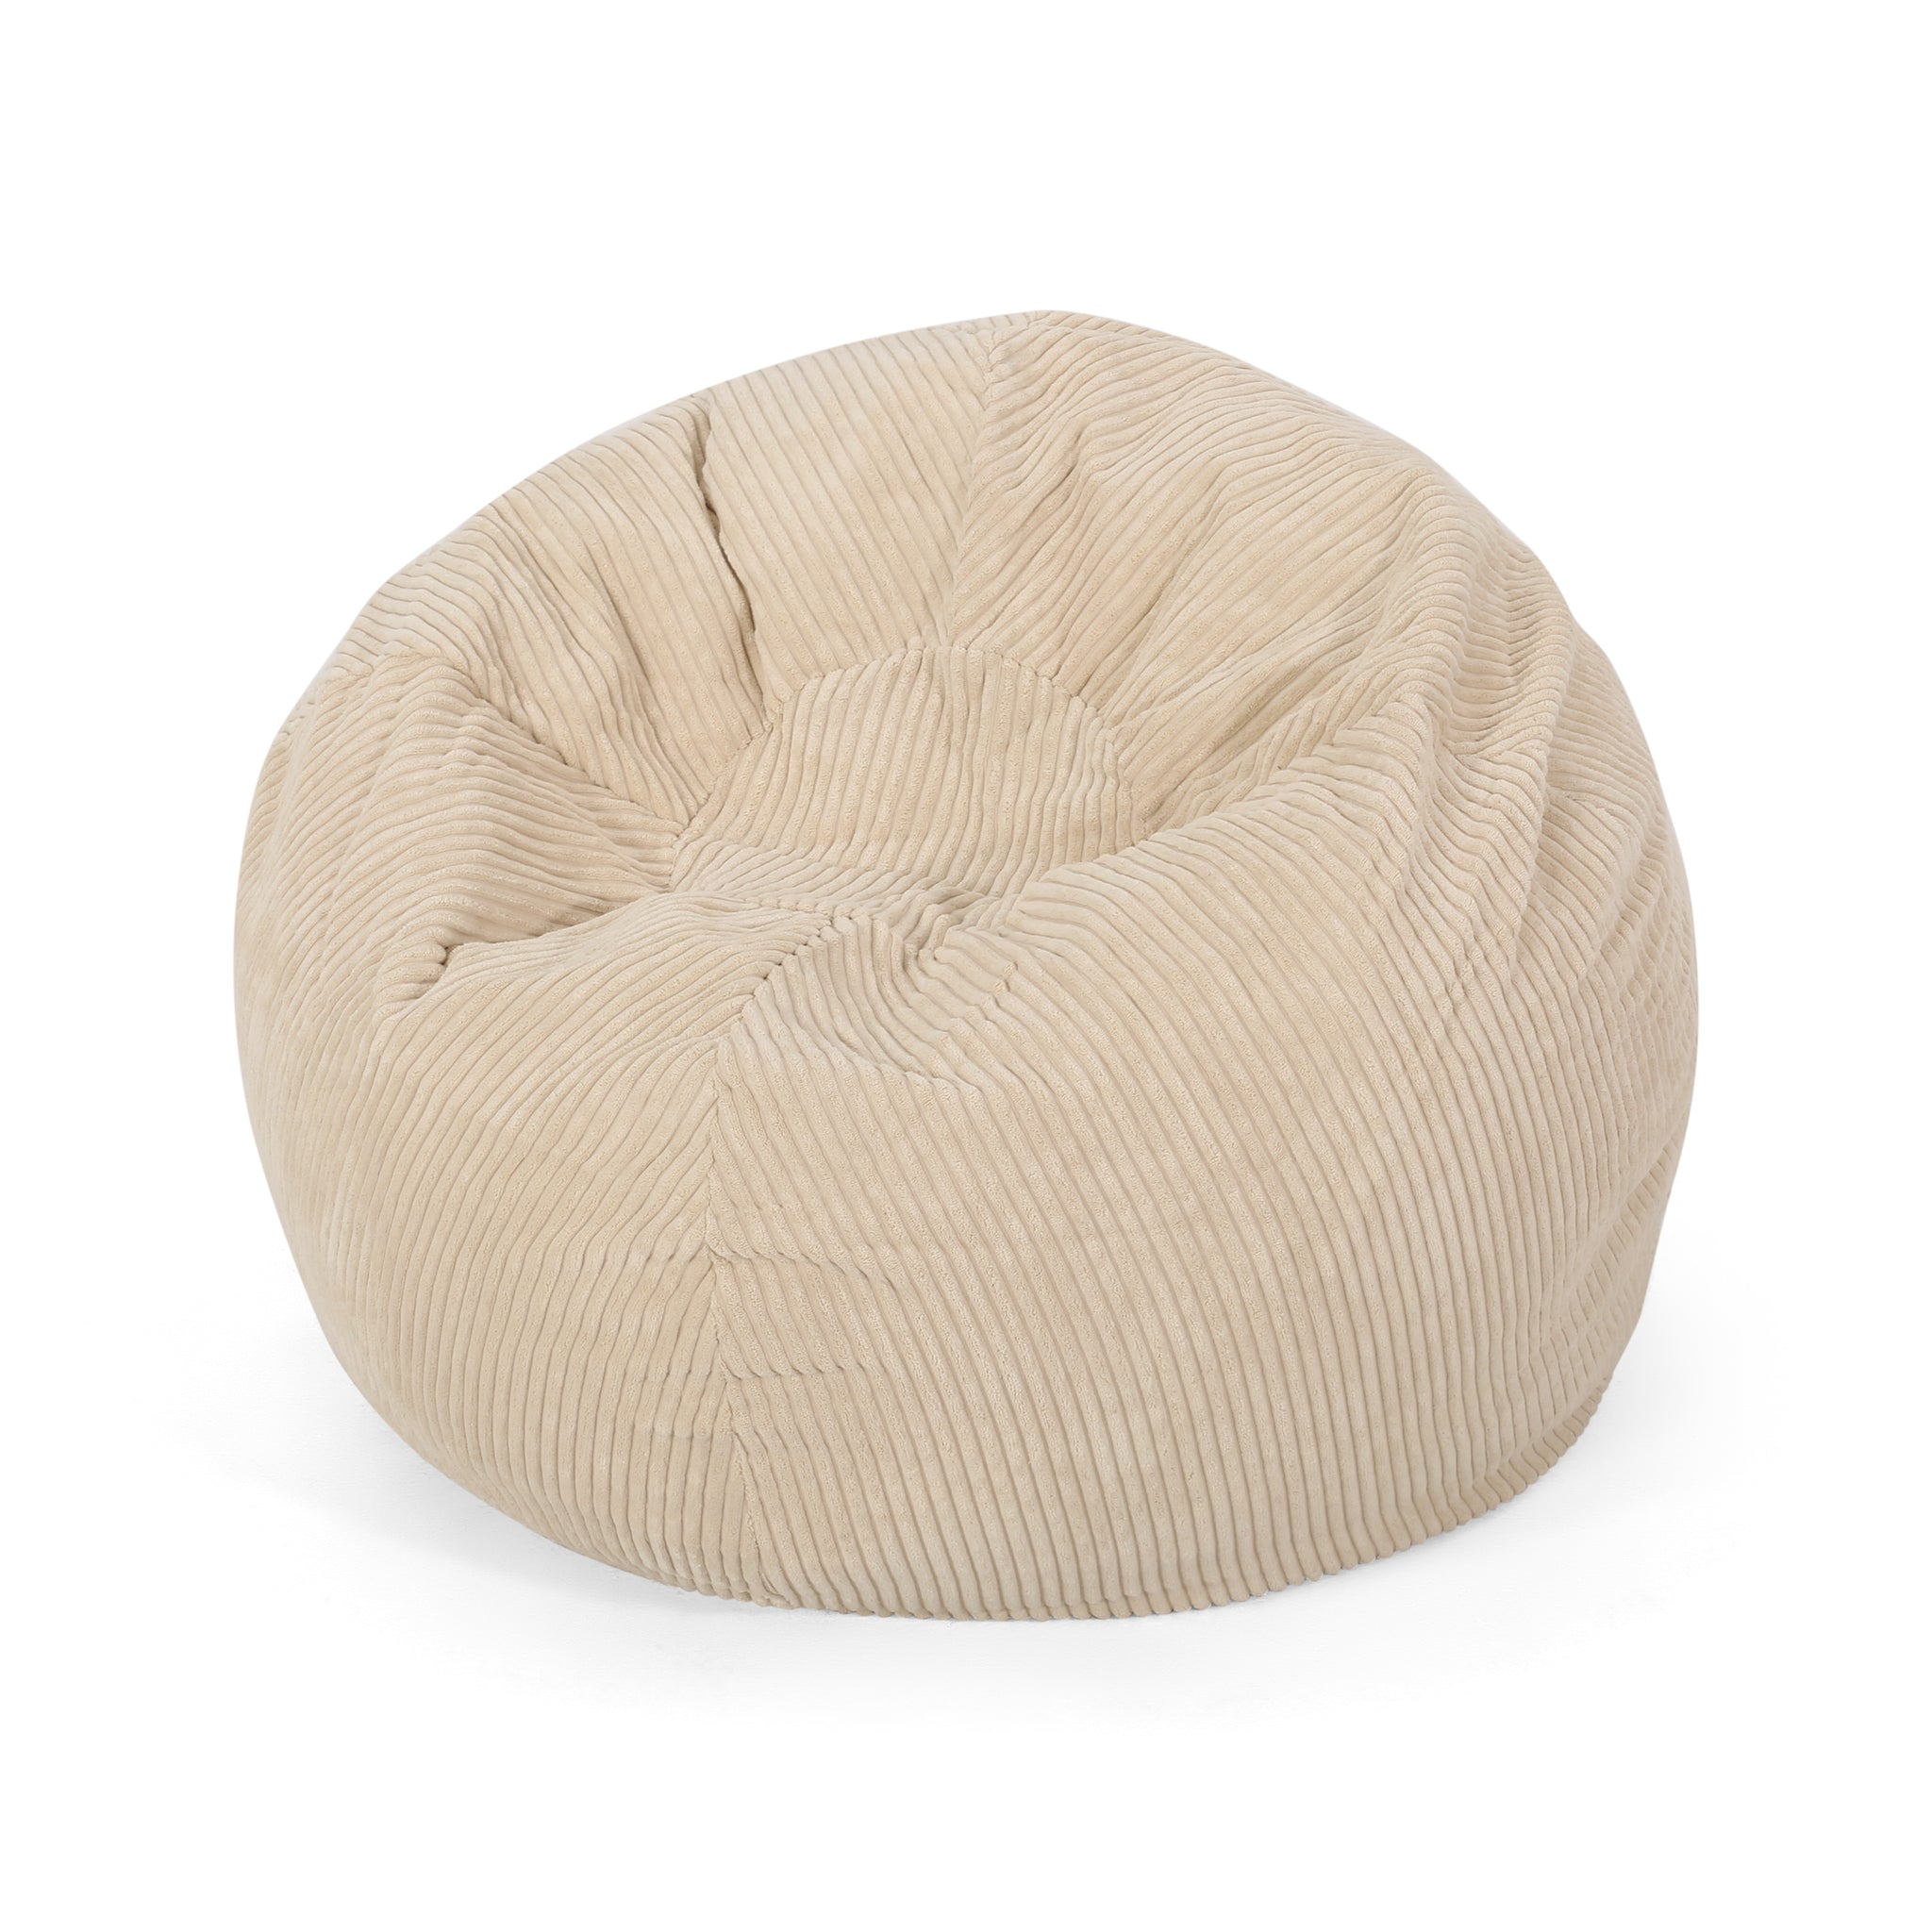 Zarate 3 Foot Corduroy Rounded Bean Bag, Ivory ivory-fabric